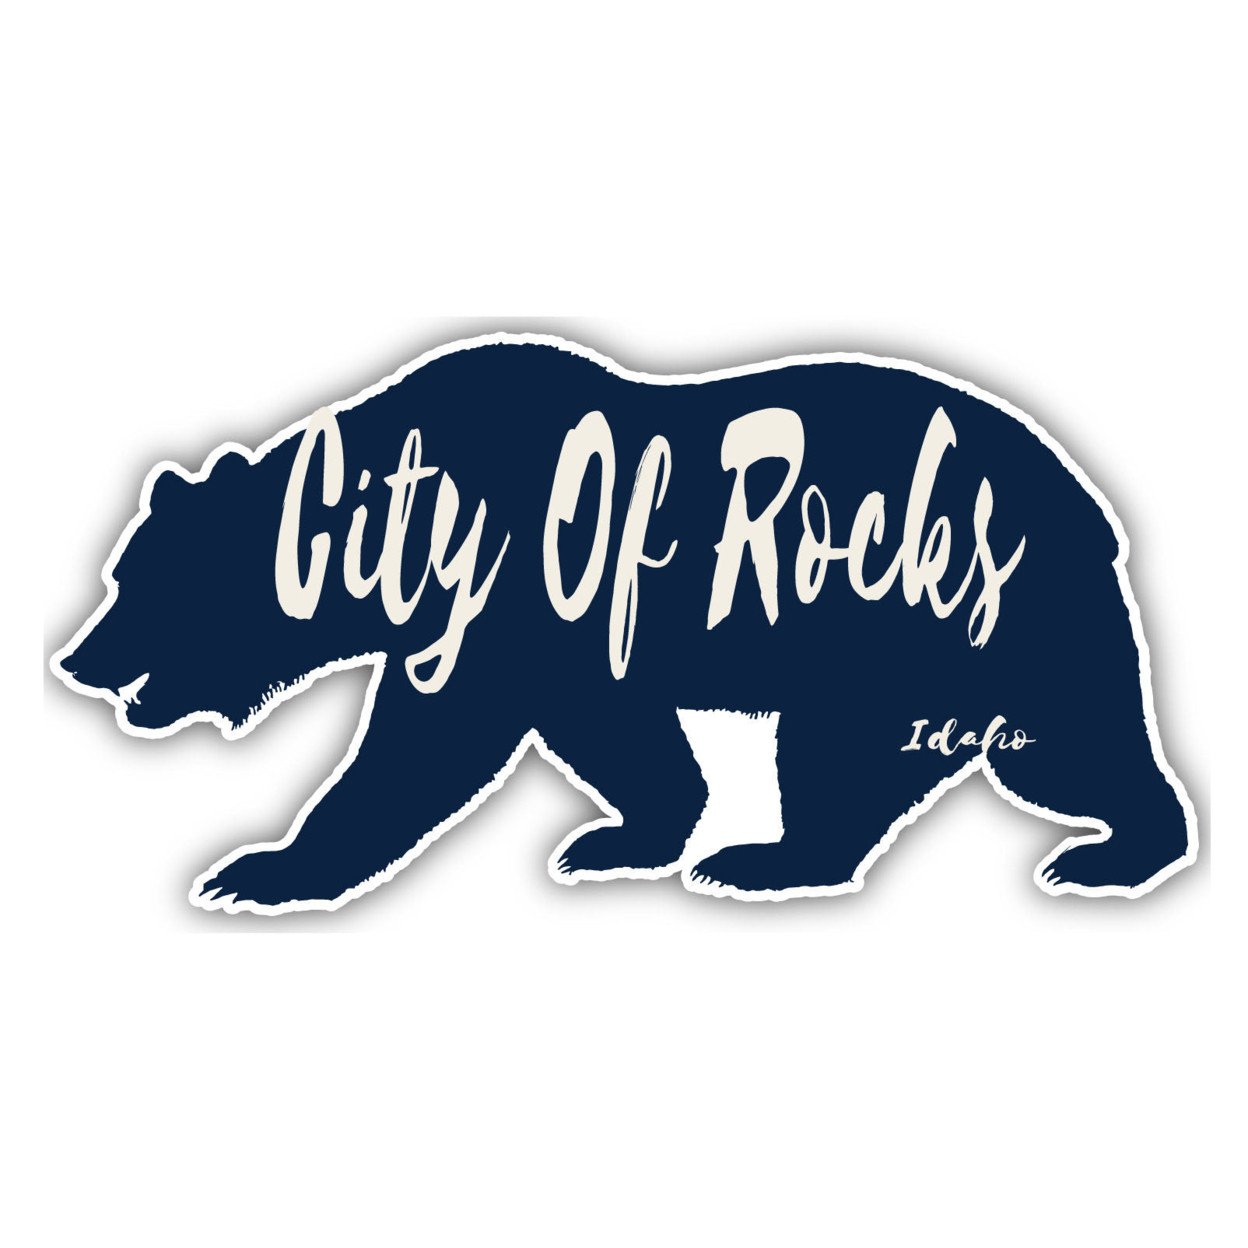 City Of Rocks Idaho Souvenir Decorative Stickers (Choose Theme And Size) - 4-Pack, 4-Inch, Camp Life